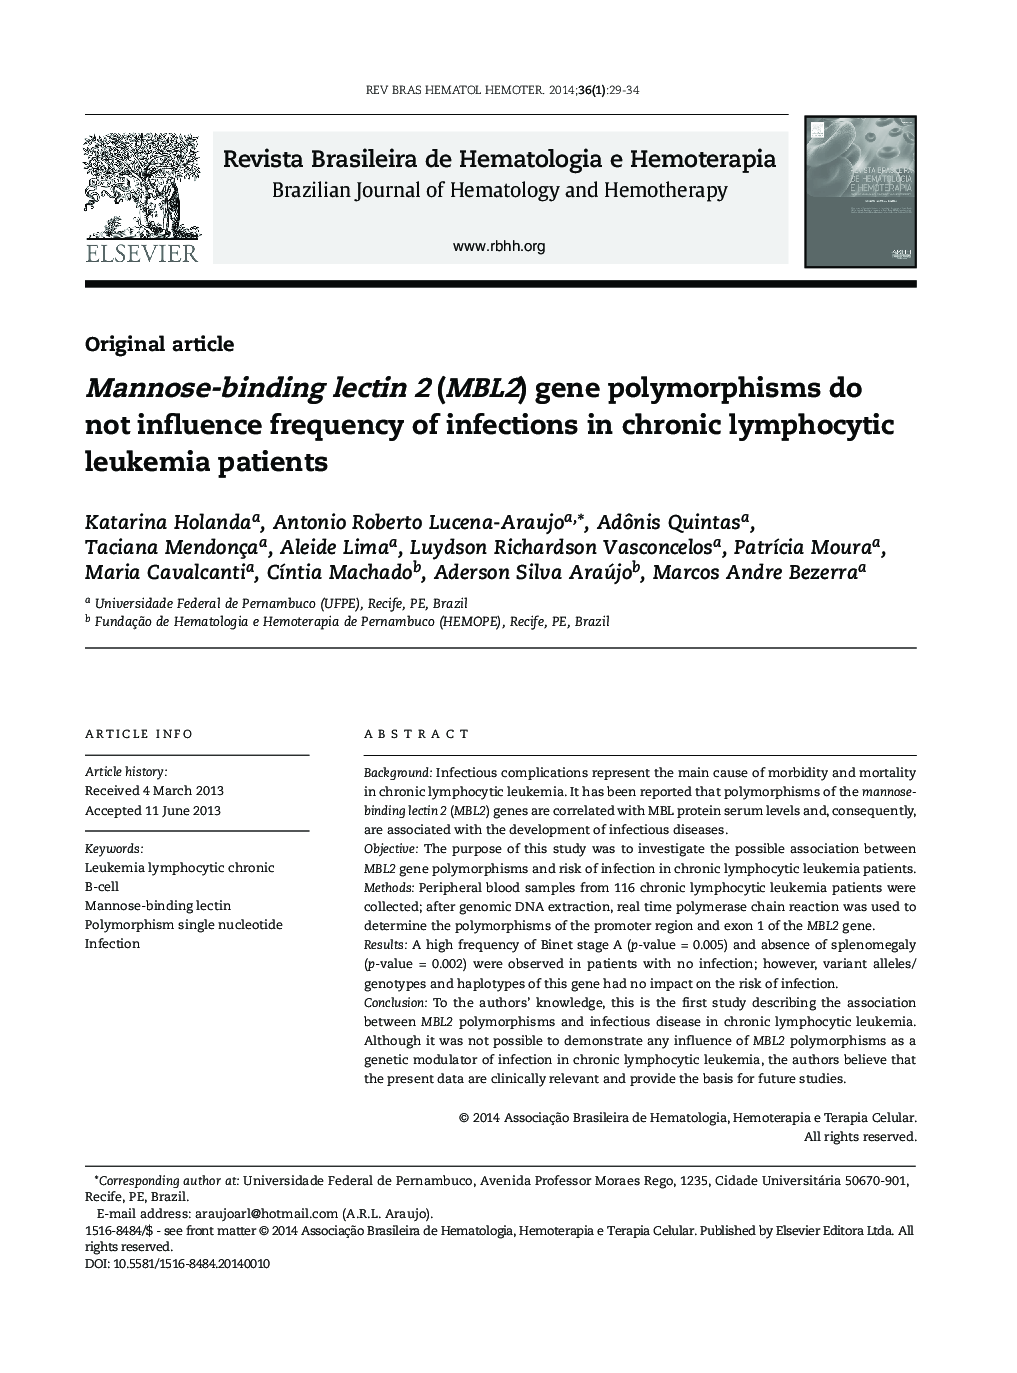 Mannose-binding lectin 2 (MBL2) gene polymorphisms do not influence frequency of infections in chronic lymphocytic leukemia patients